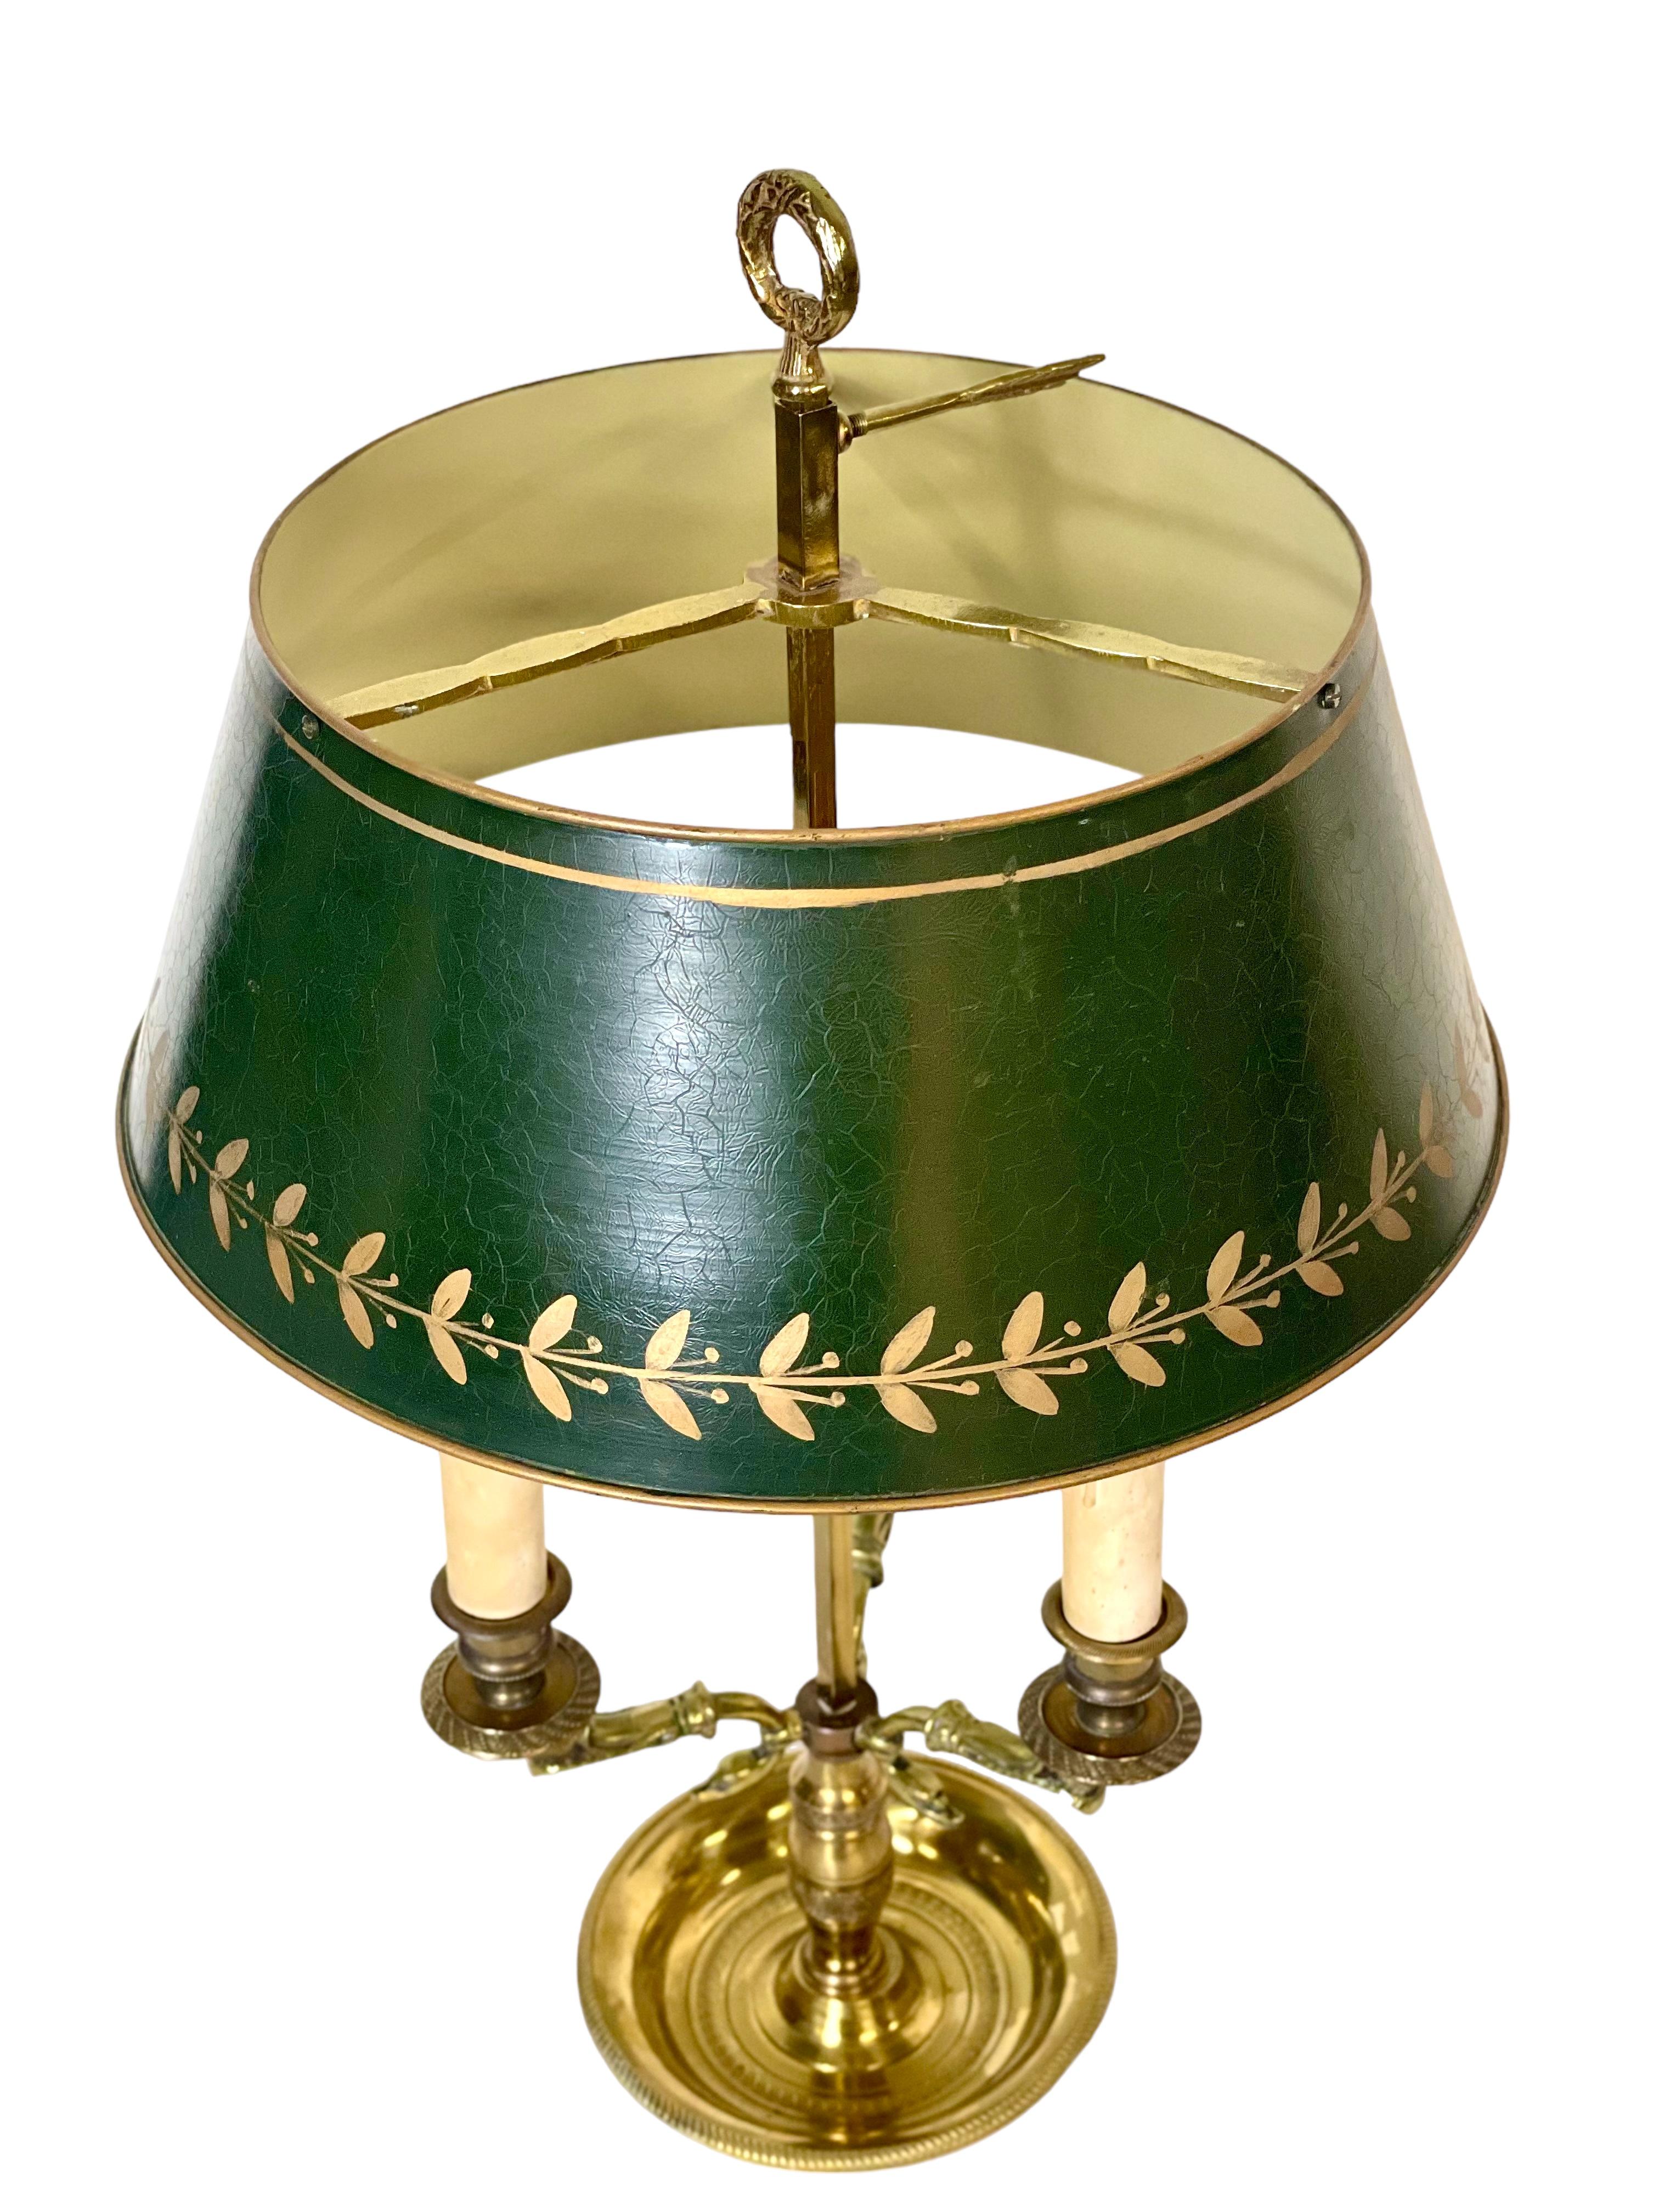 A late 19th century three-light 'Bouillotte' table lamp in gilded bronze and brass, with unusual duck's head styled arms and a typical green lacquered metal (tole) shade. Designed in the empire style, the lamp features a baluster stem, with an